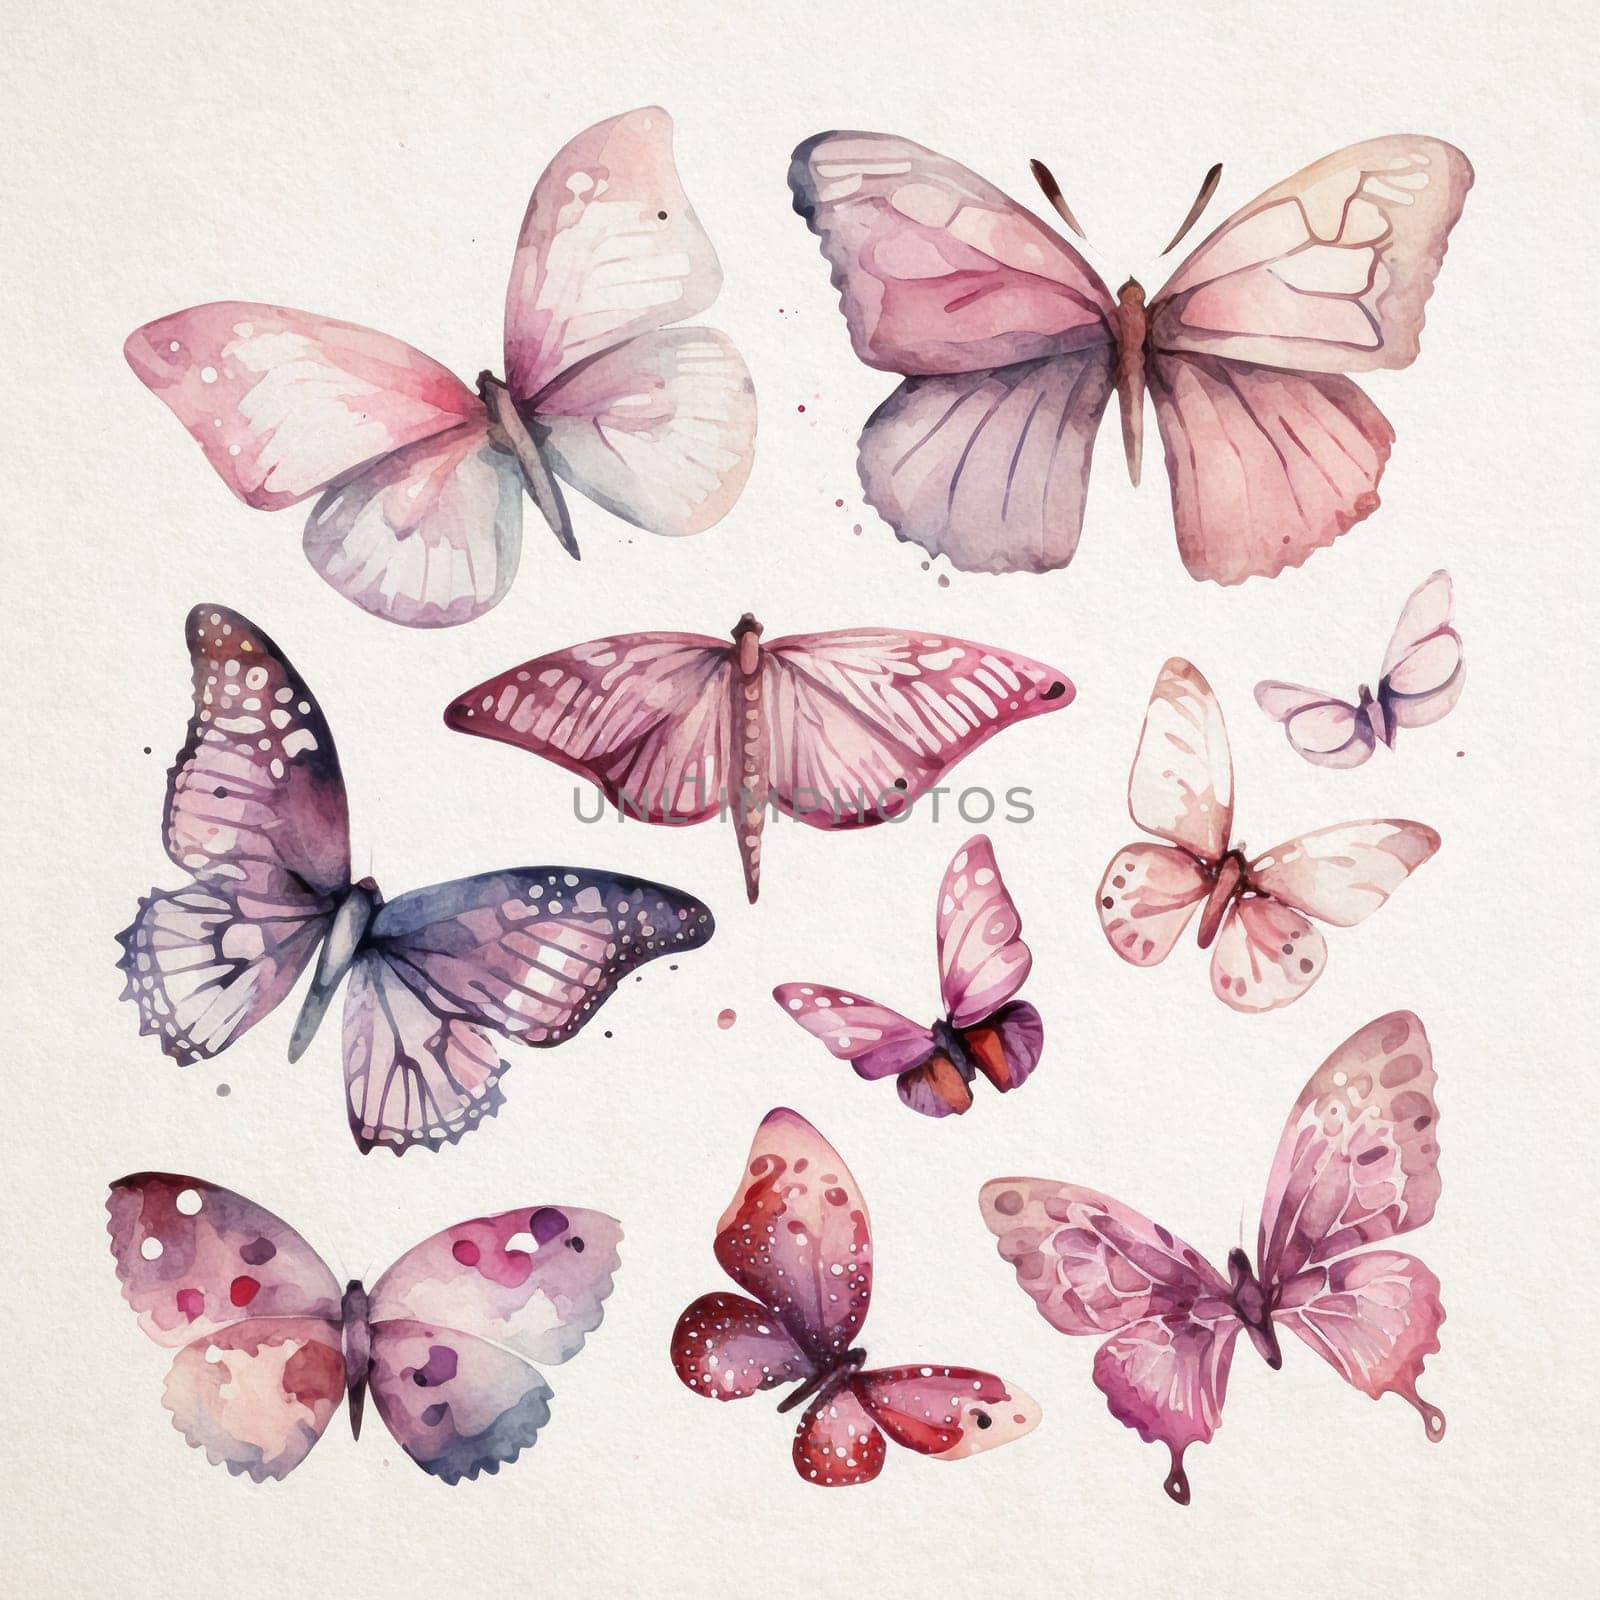 Collection of watercolor butterflies in shades of pink on a white paper background by igor010